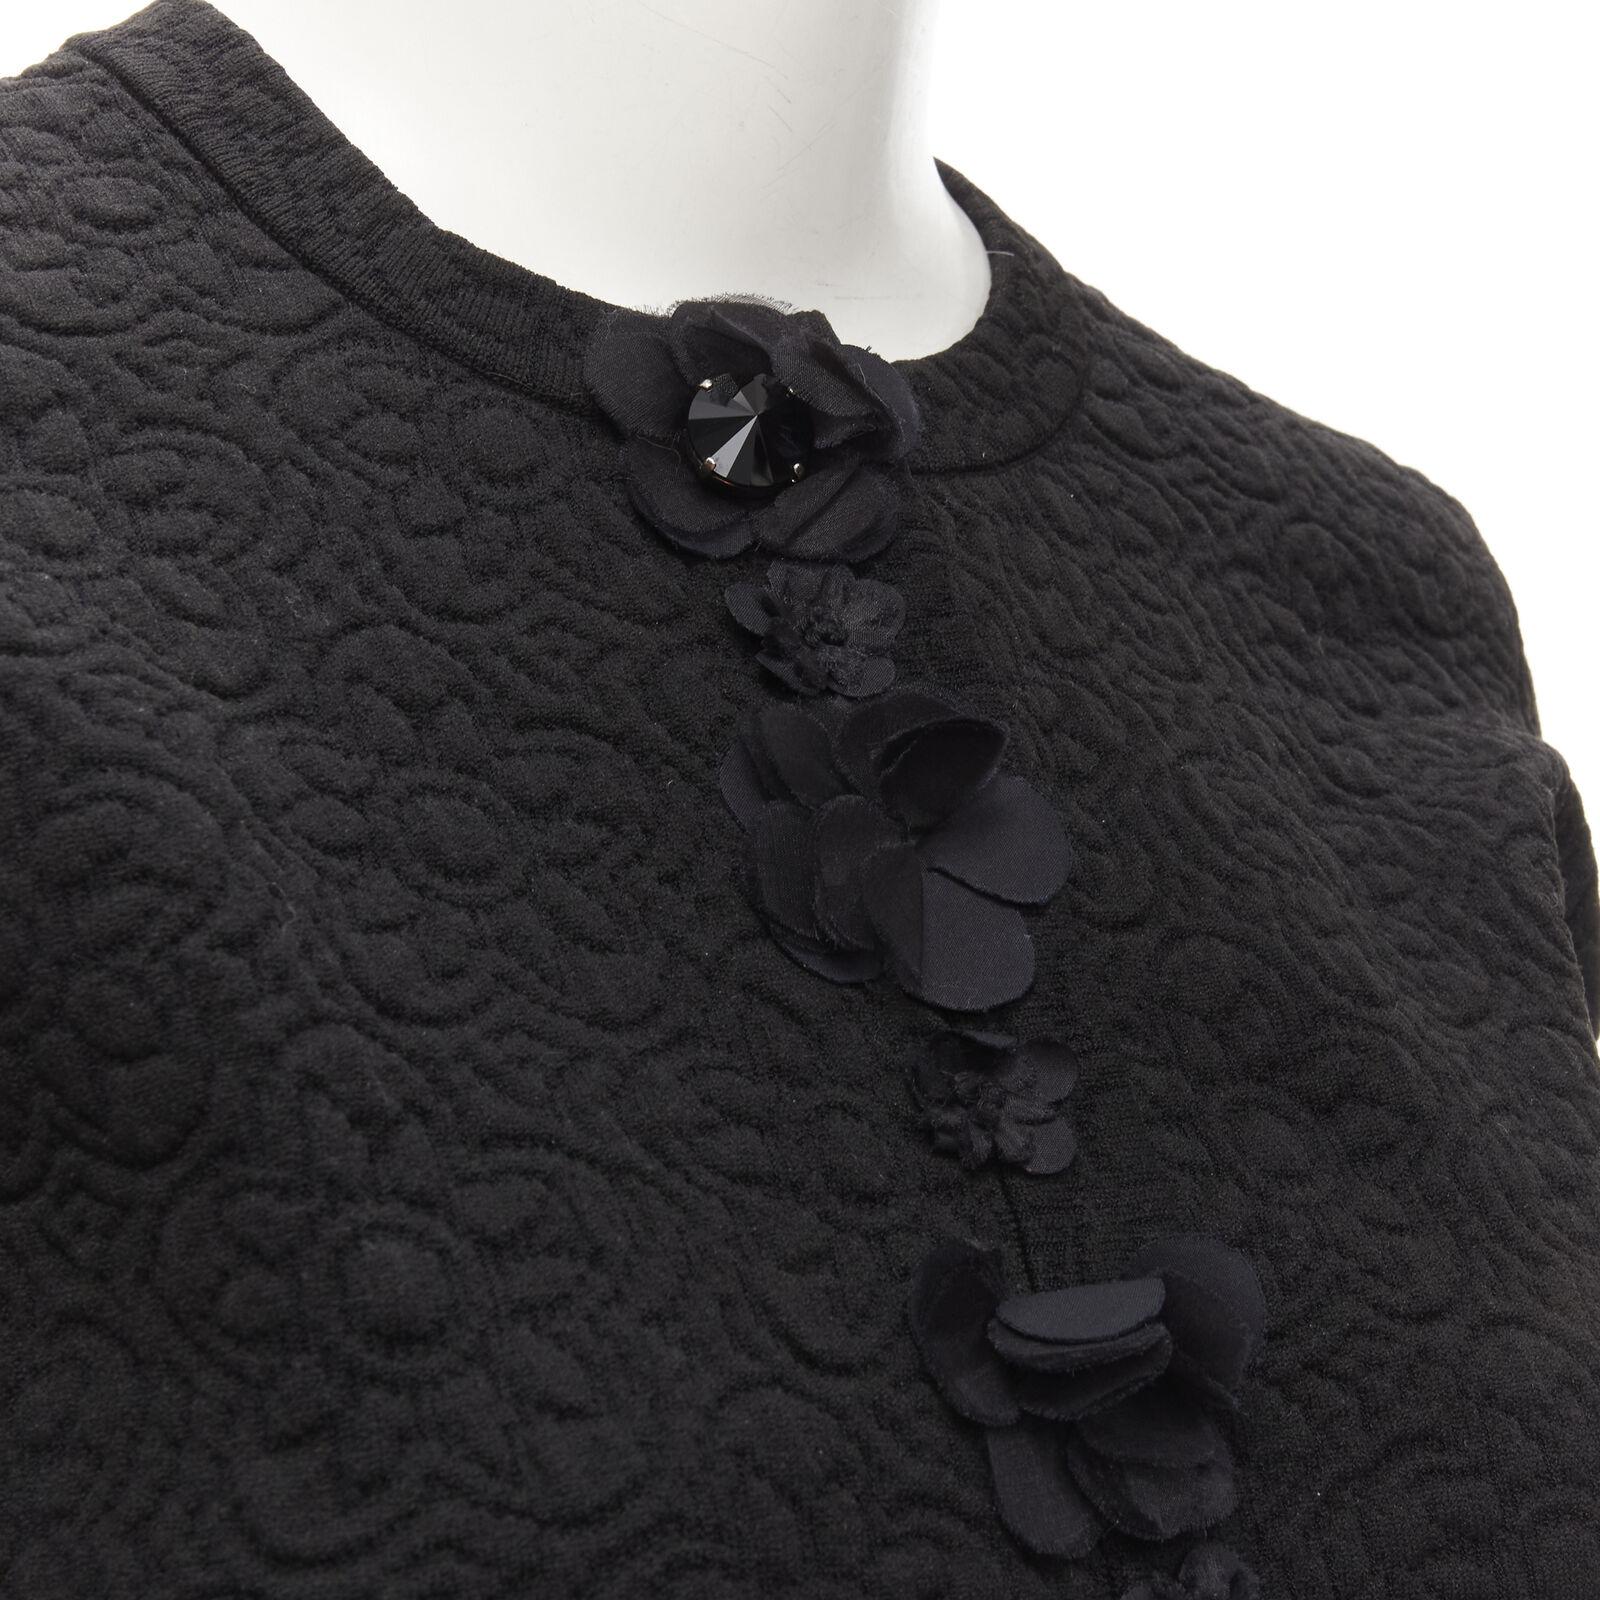 FENDI Flowerland black floral jacquard 3D petal stud cardigan IT36 XS
Reference: LNKO/A02058
Brand: Fendi
Collection: Flowerland
Material: Others
Color: Black
Pattern: Floral
Closure: Snap Buttons
Lining: Unlined
Extra Details: 3D silk petal and